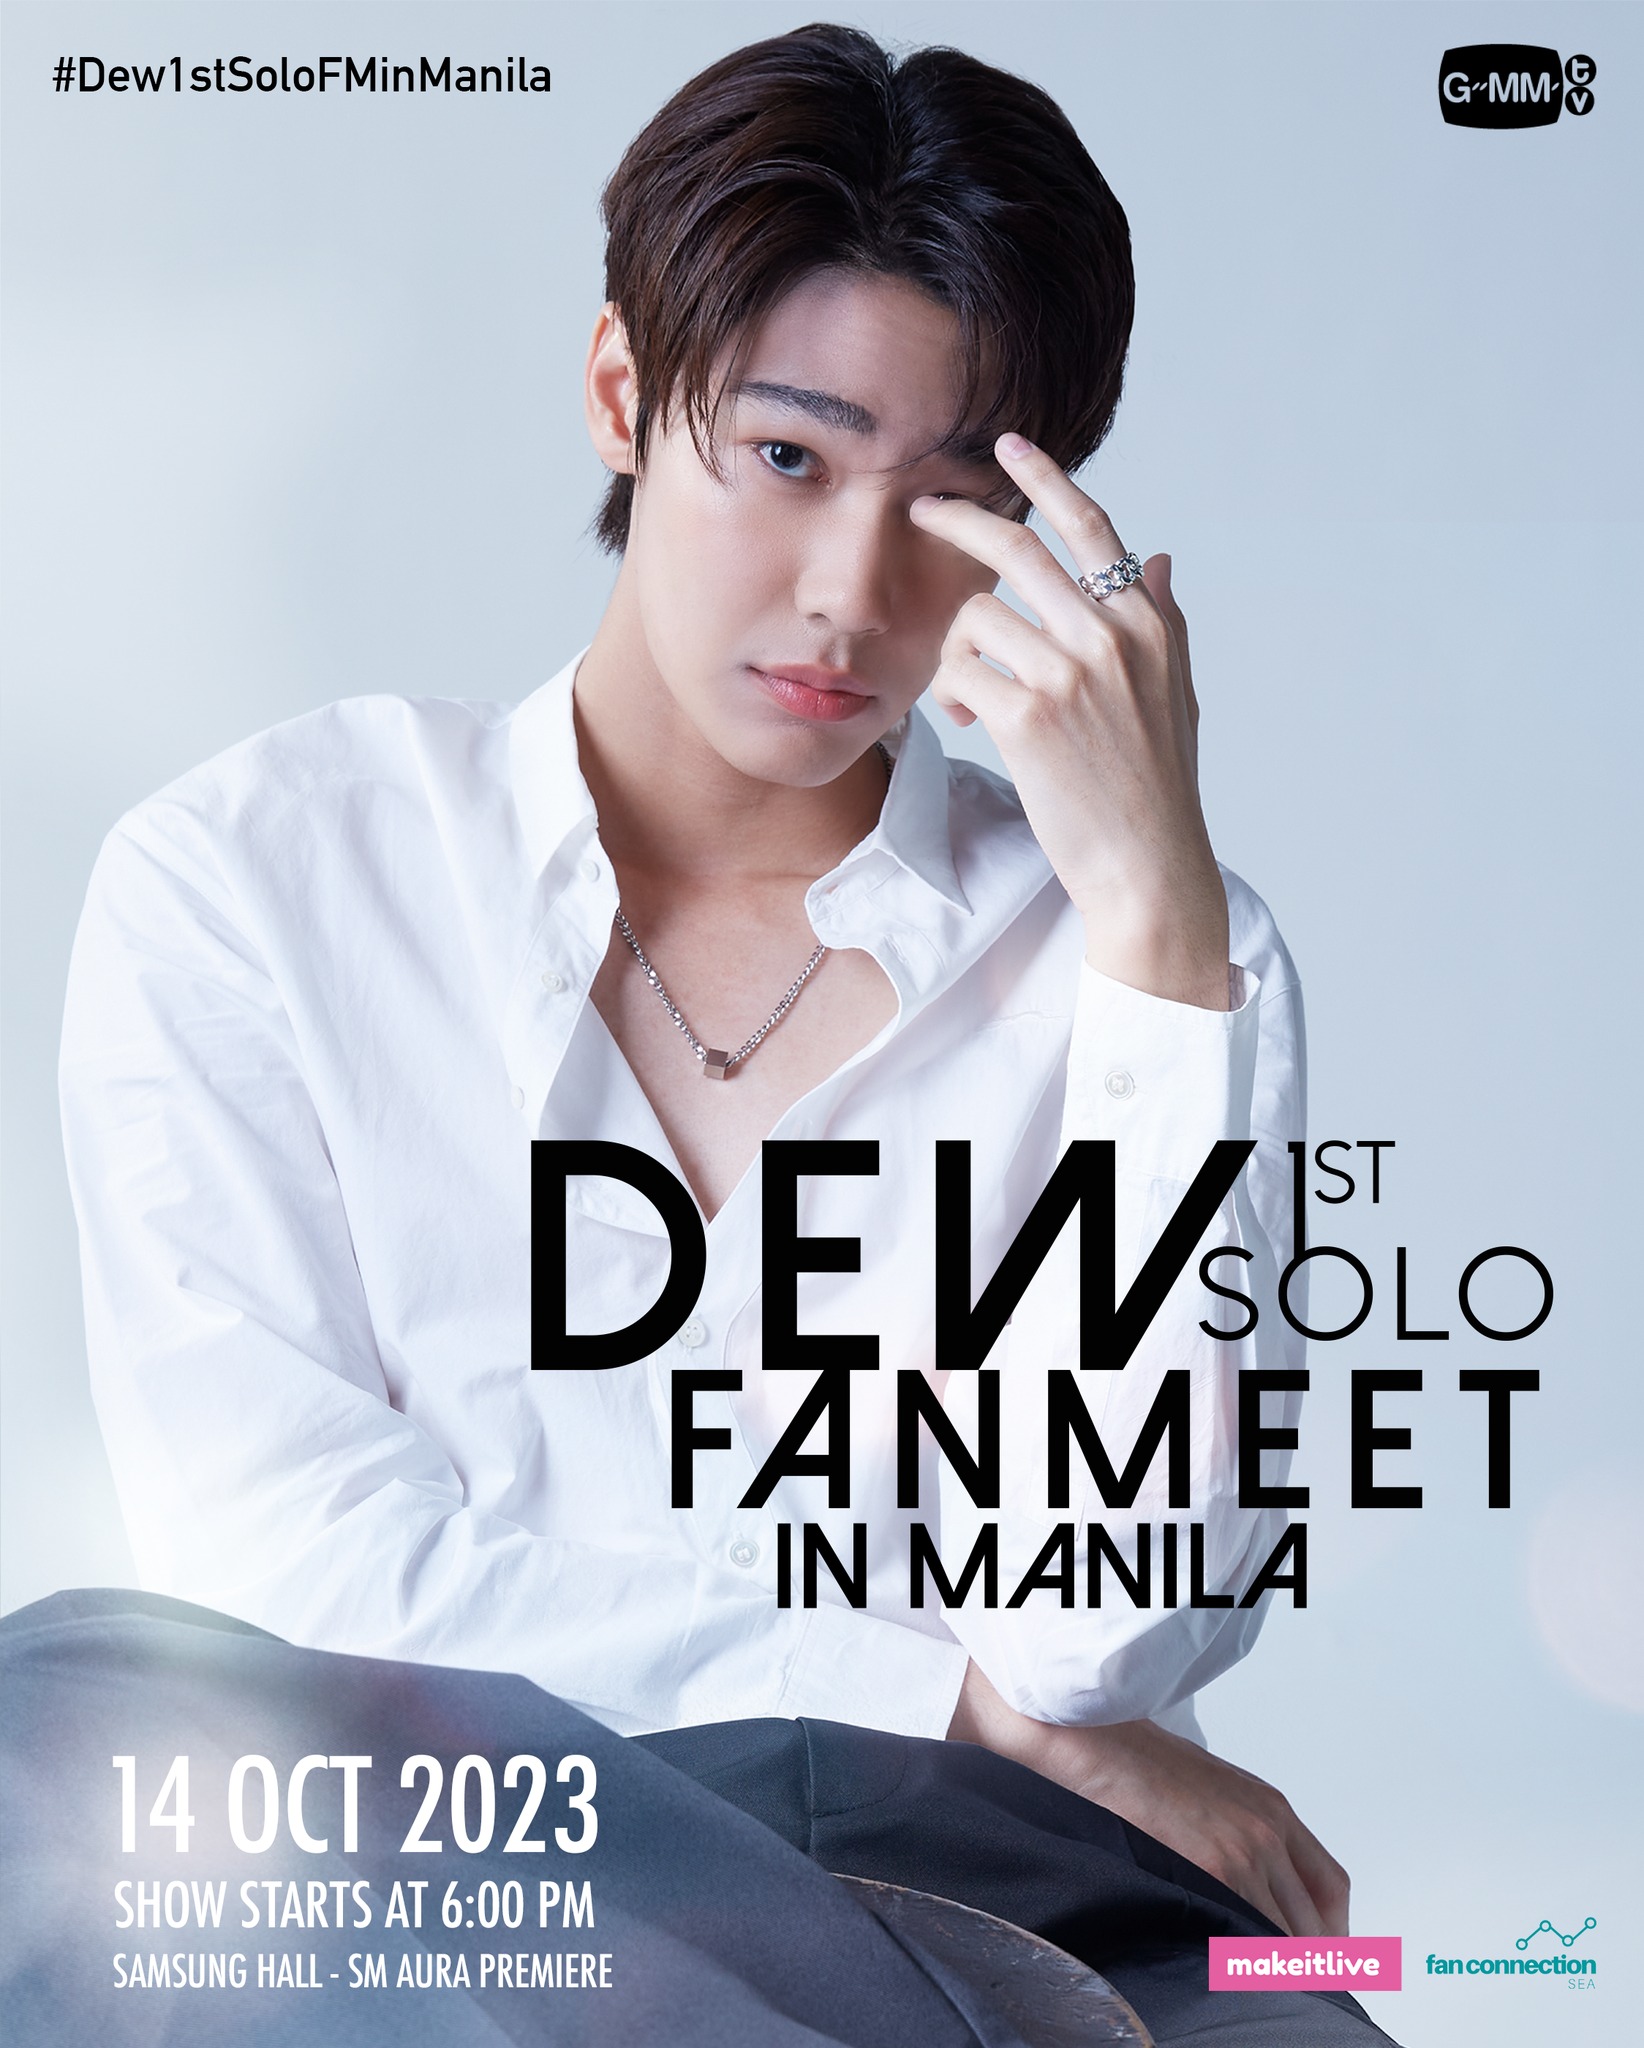 Thai Heartthrob Dew to Visit the Philippines for His First Solo Fan Meet